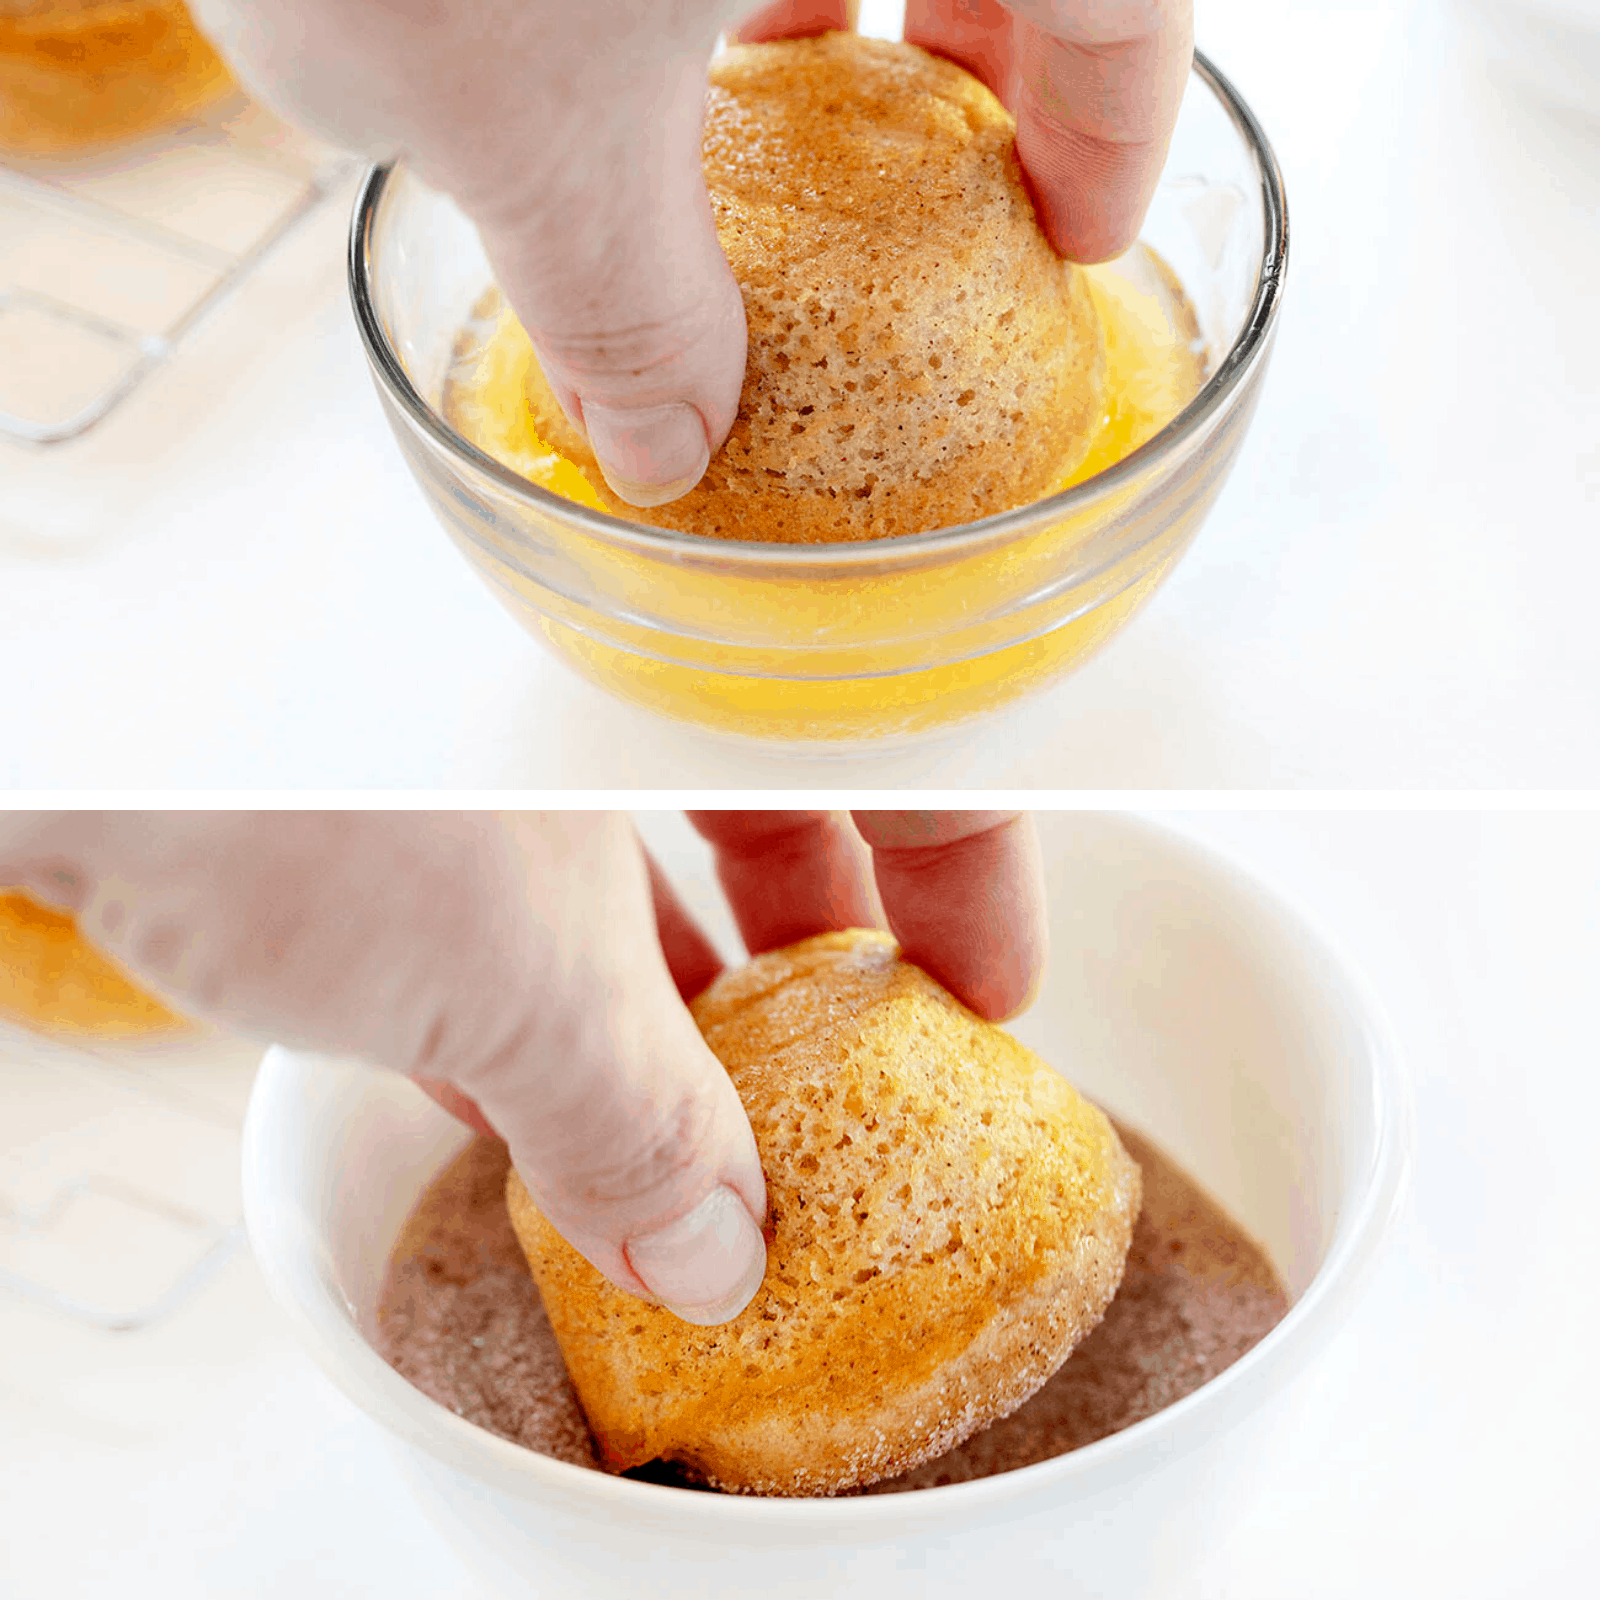 Dipping Donut Muffin into Butter and Cinnamon Sugar